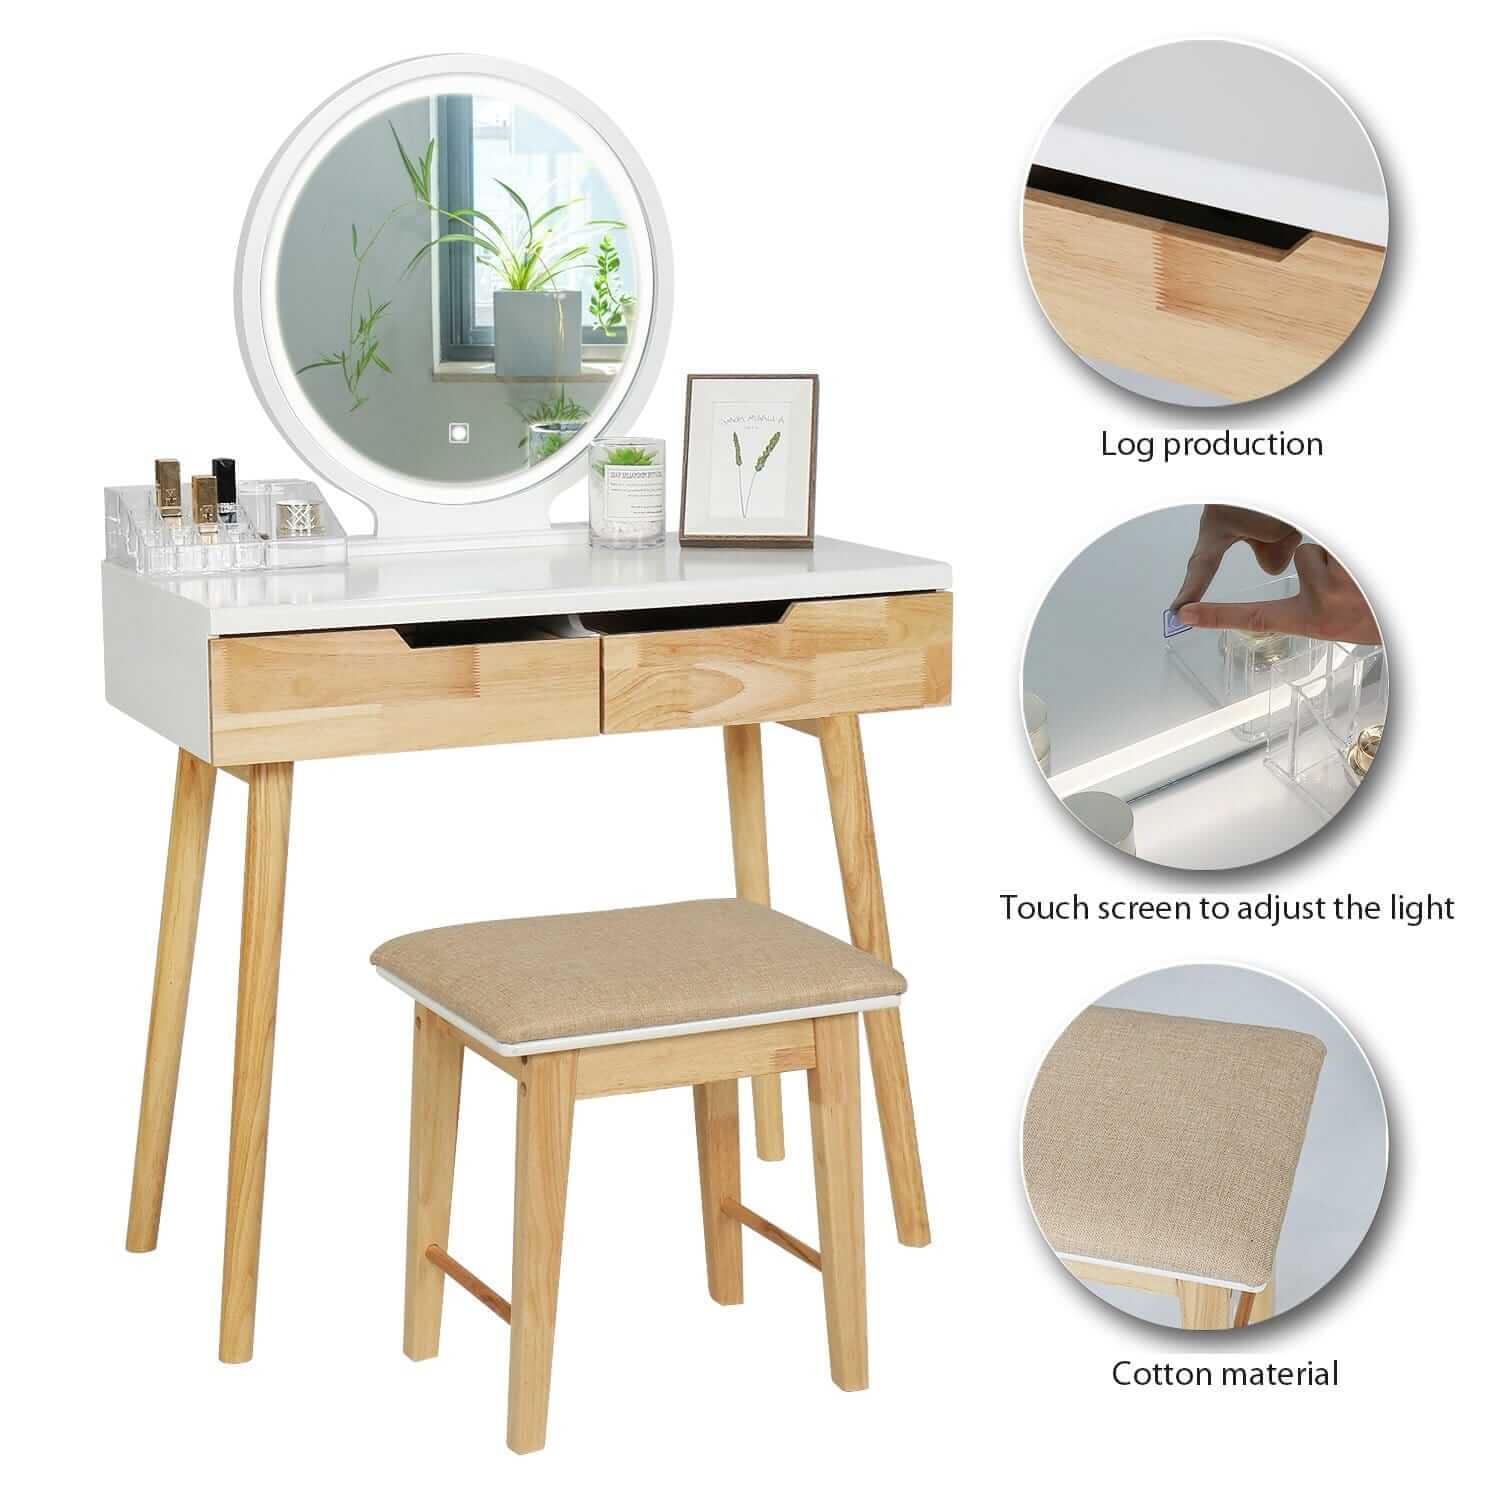 Elecwish Makeup dressing table 3 Lighting Modes Round Mirror Wood Dressing Table has 3 features